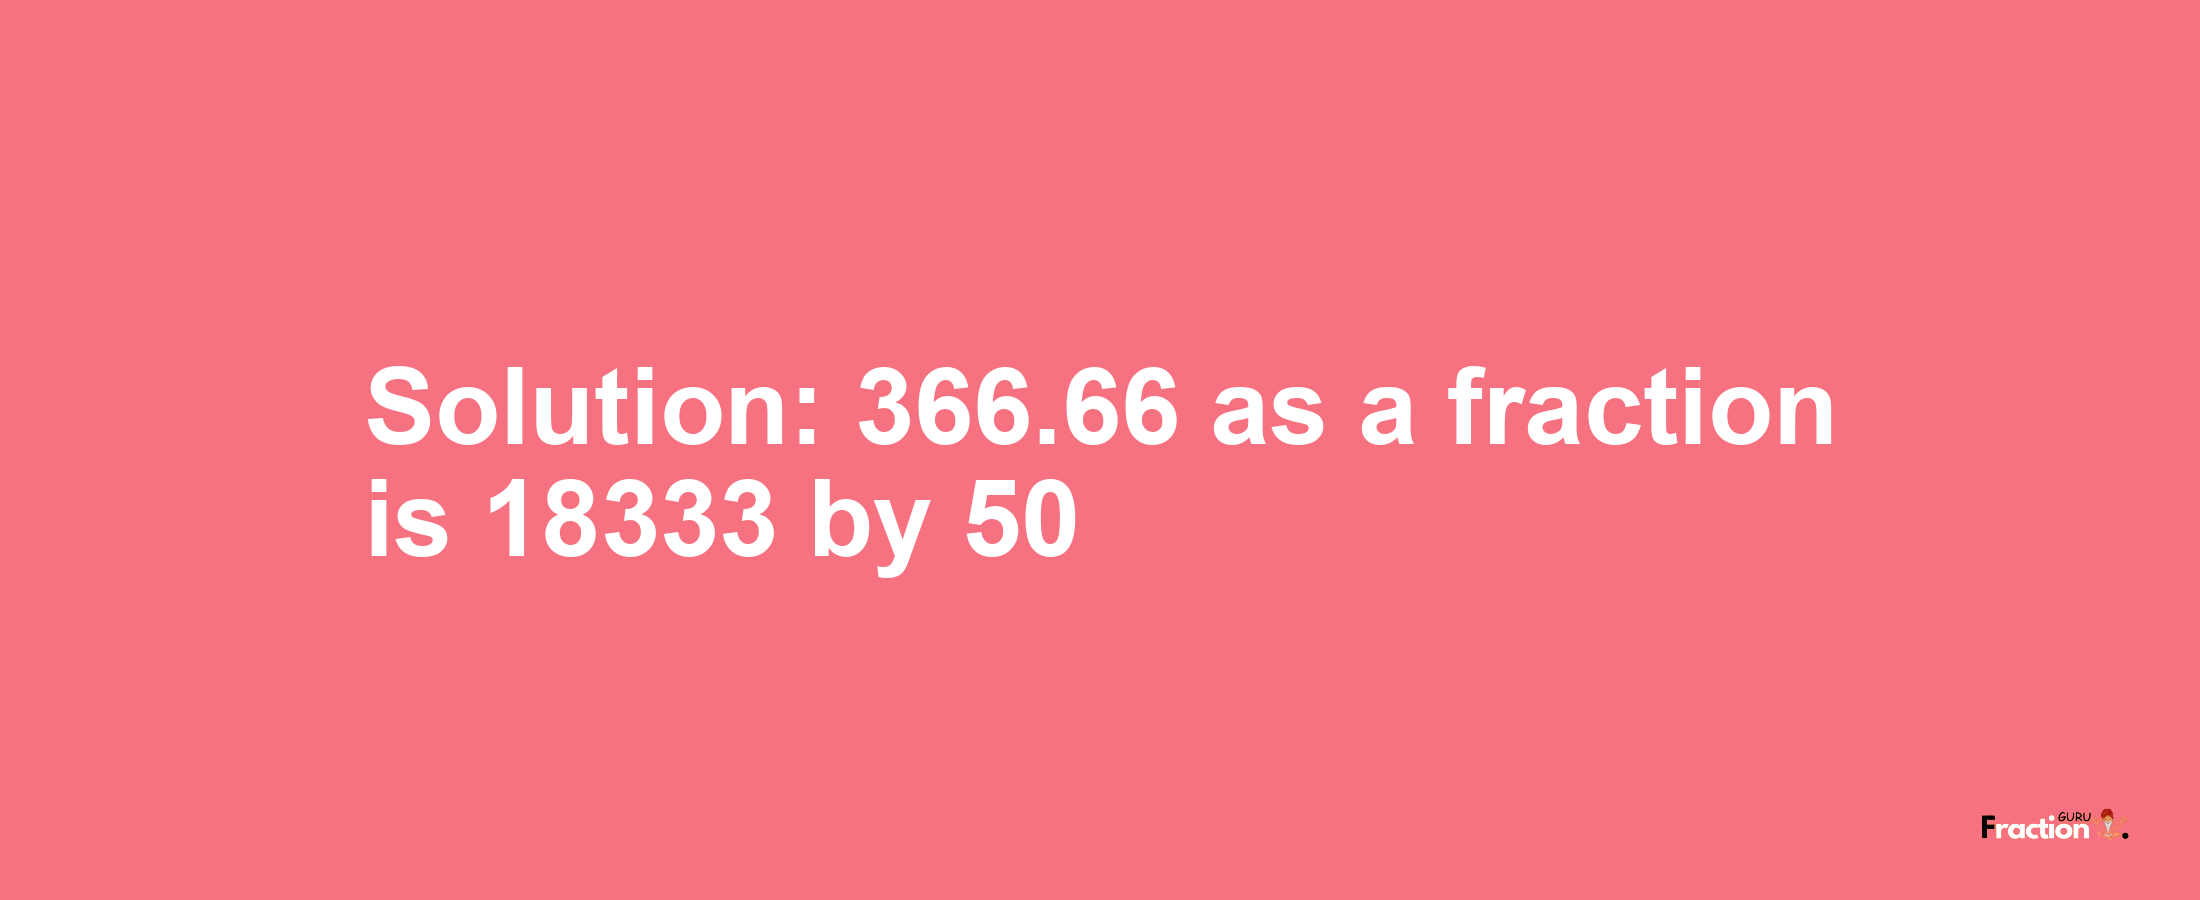 Solution:366.66 as a fraction is 18333/50